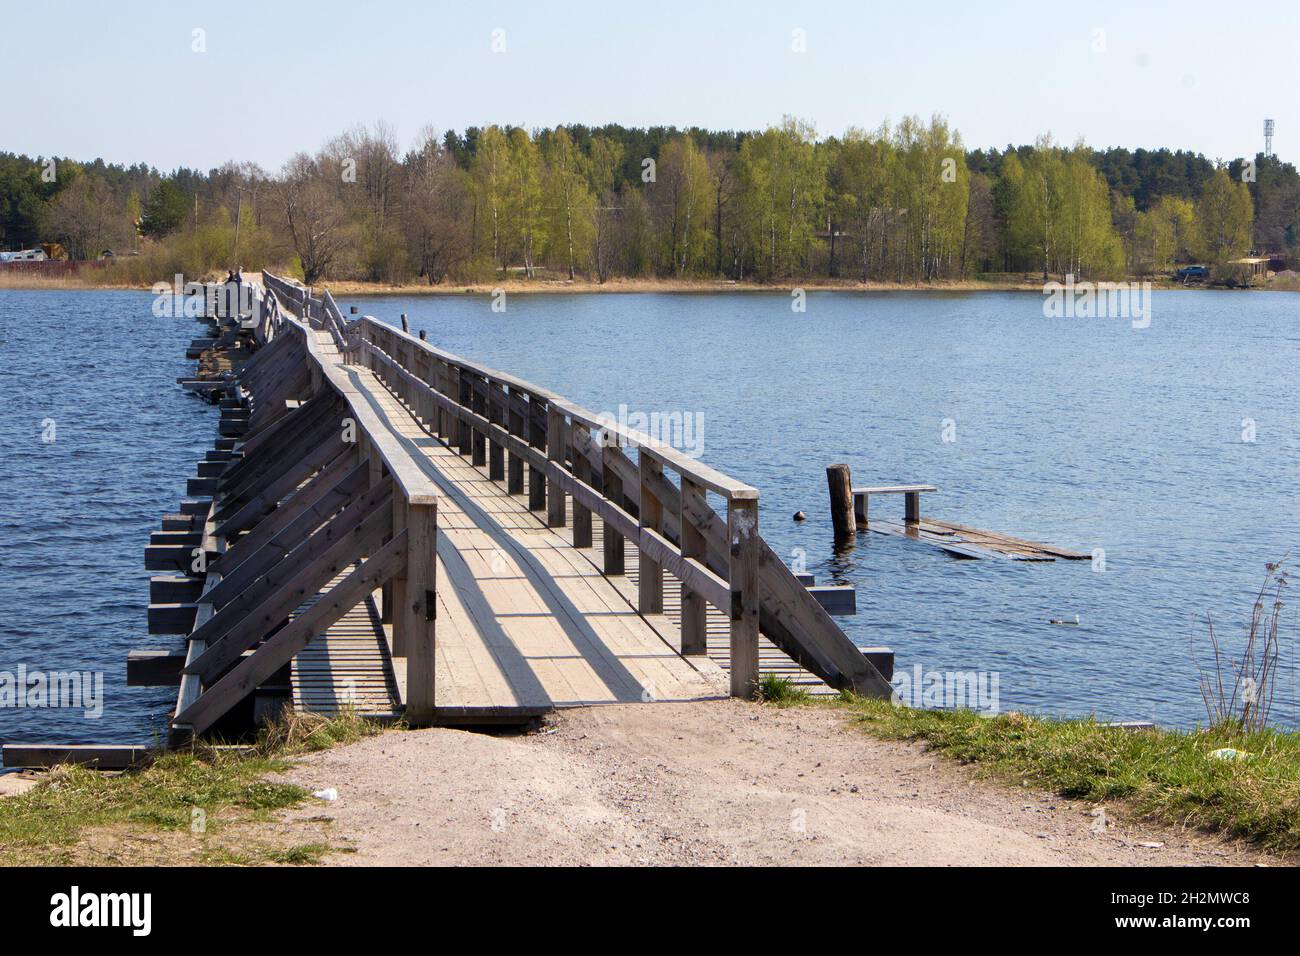 Old wooden vintage half destroyed pedestrian bridge with handrail over the lake Stock Photo